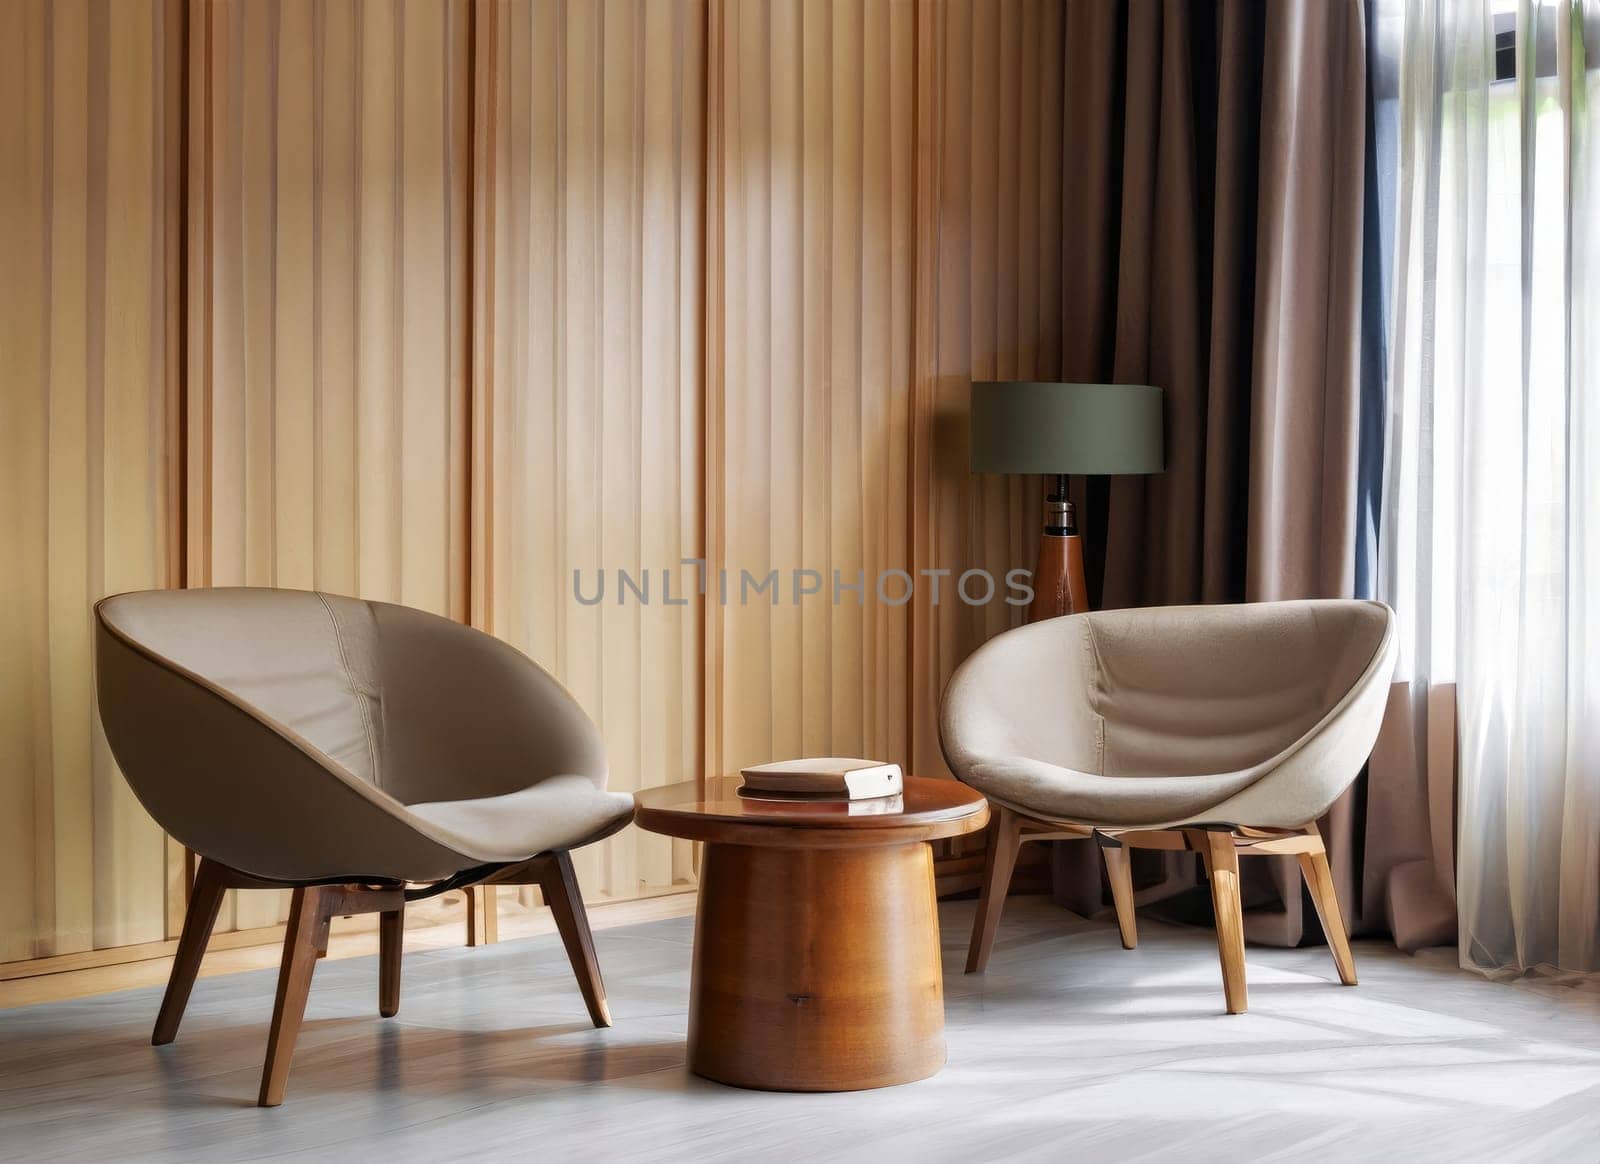  Two barrel chairs and round wooden coffee table against window near paneling wall